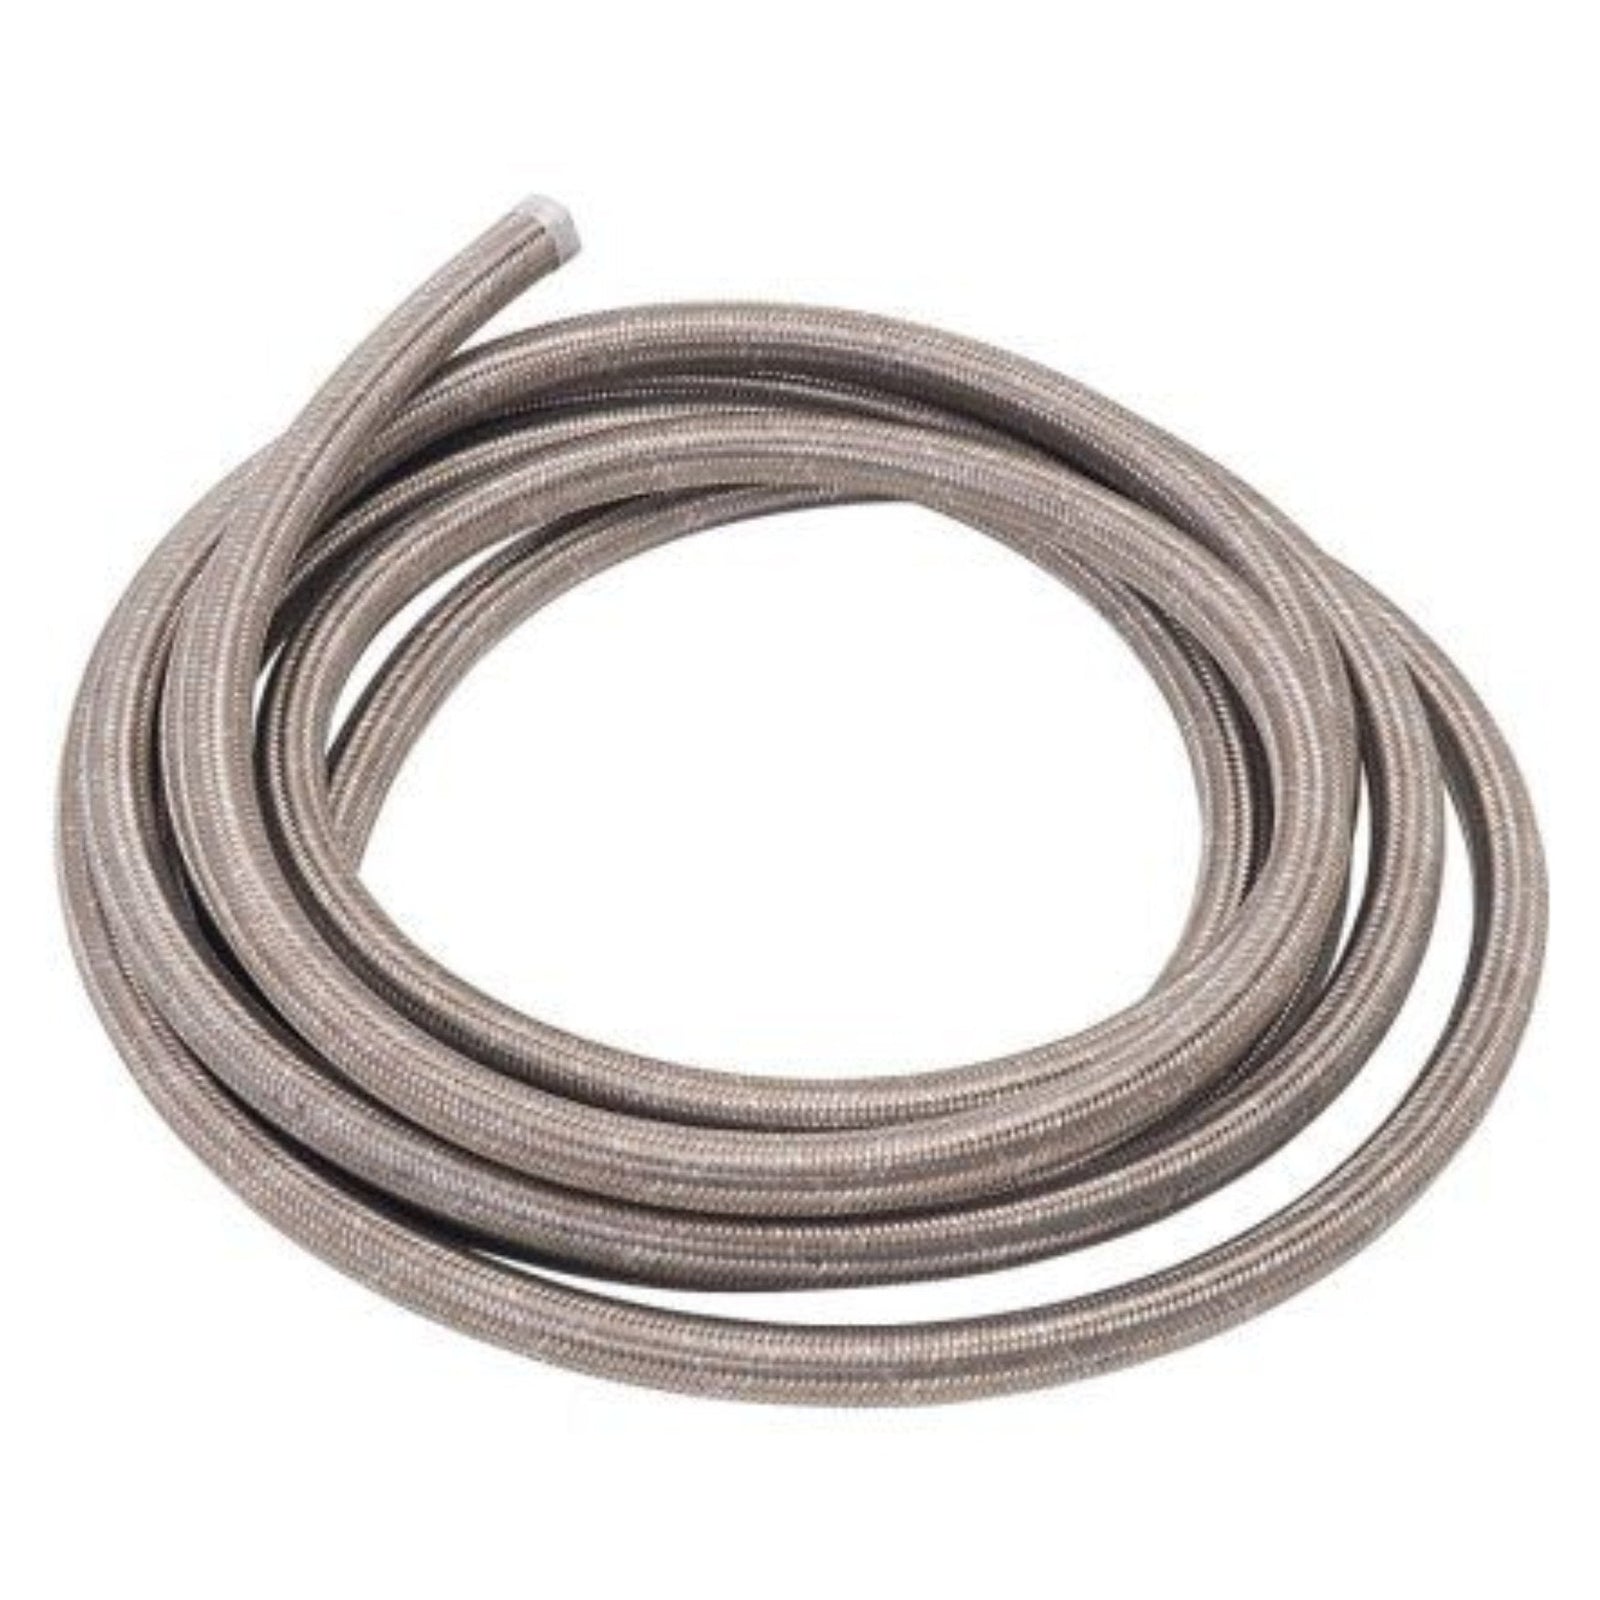 100 Series Stainless Steel Cutter Hose